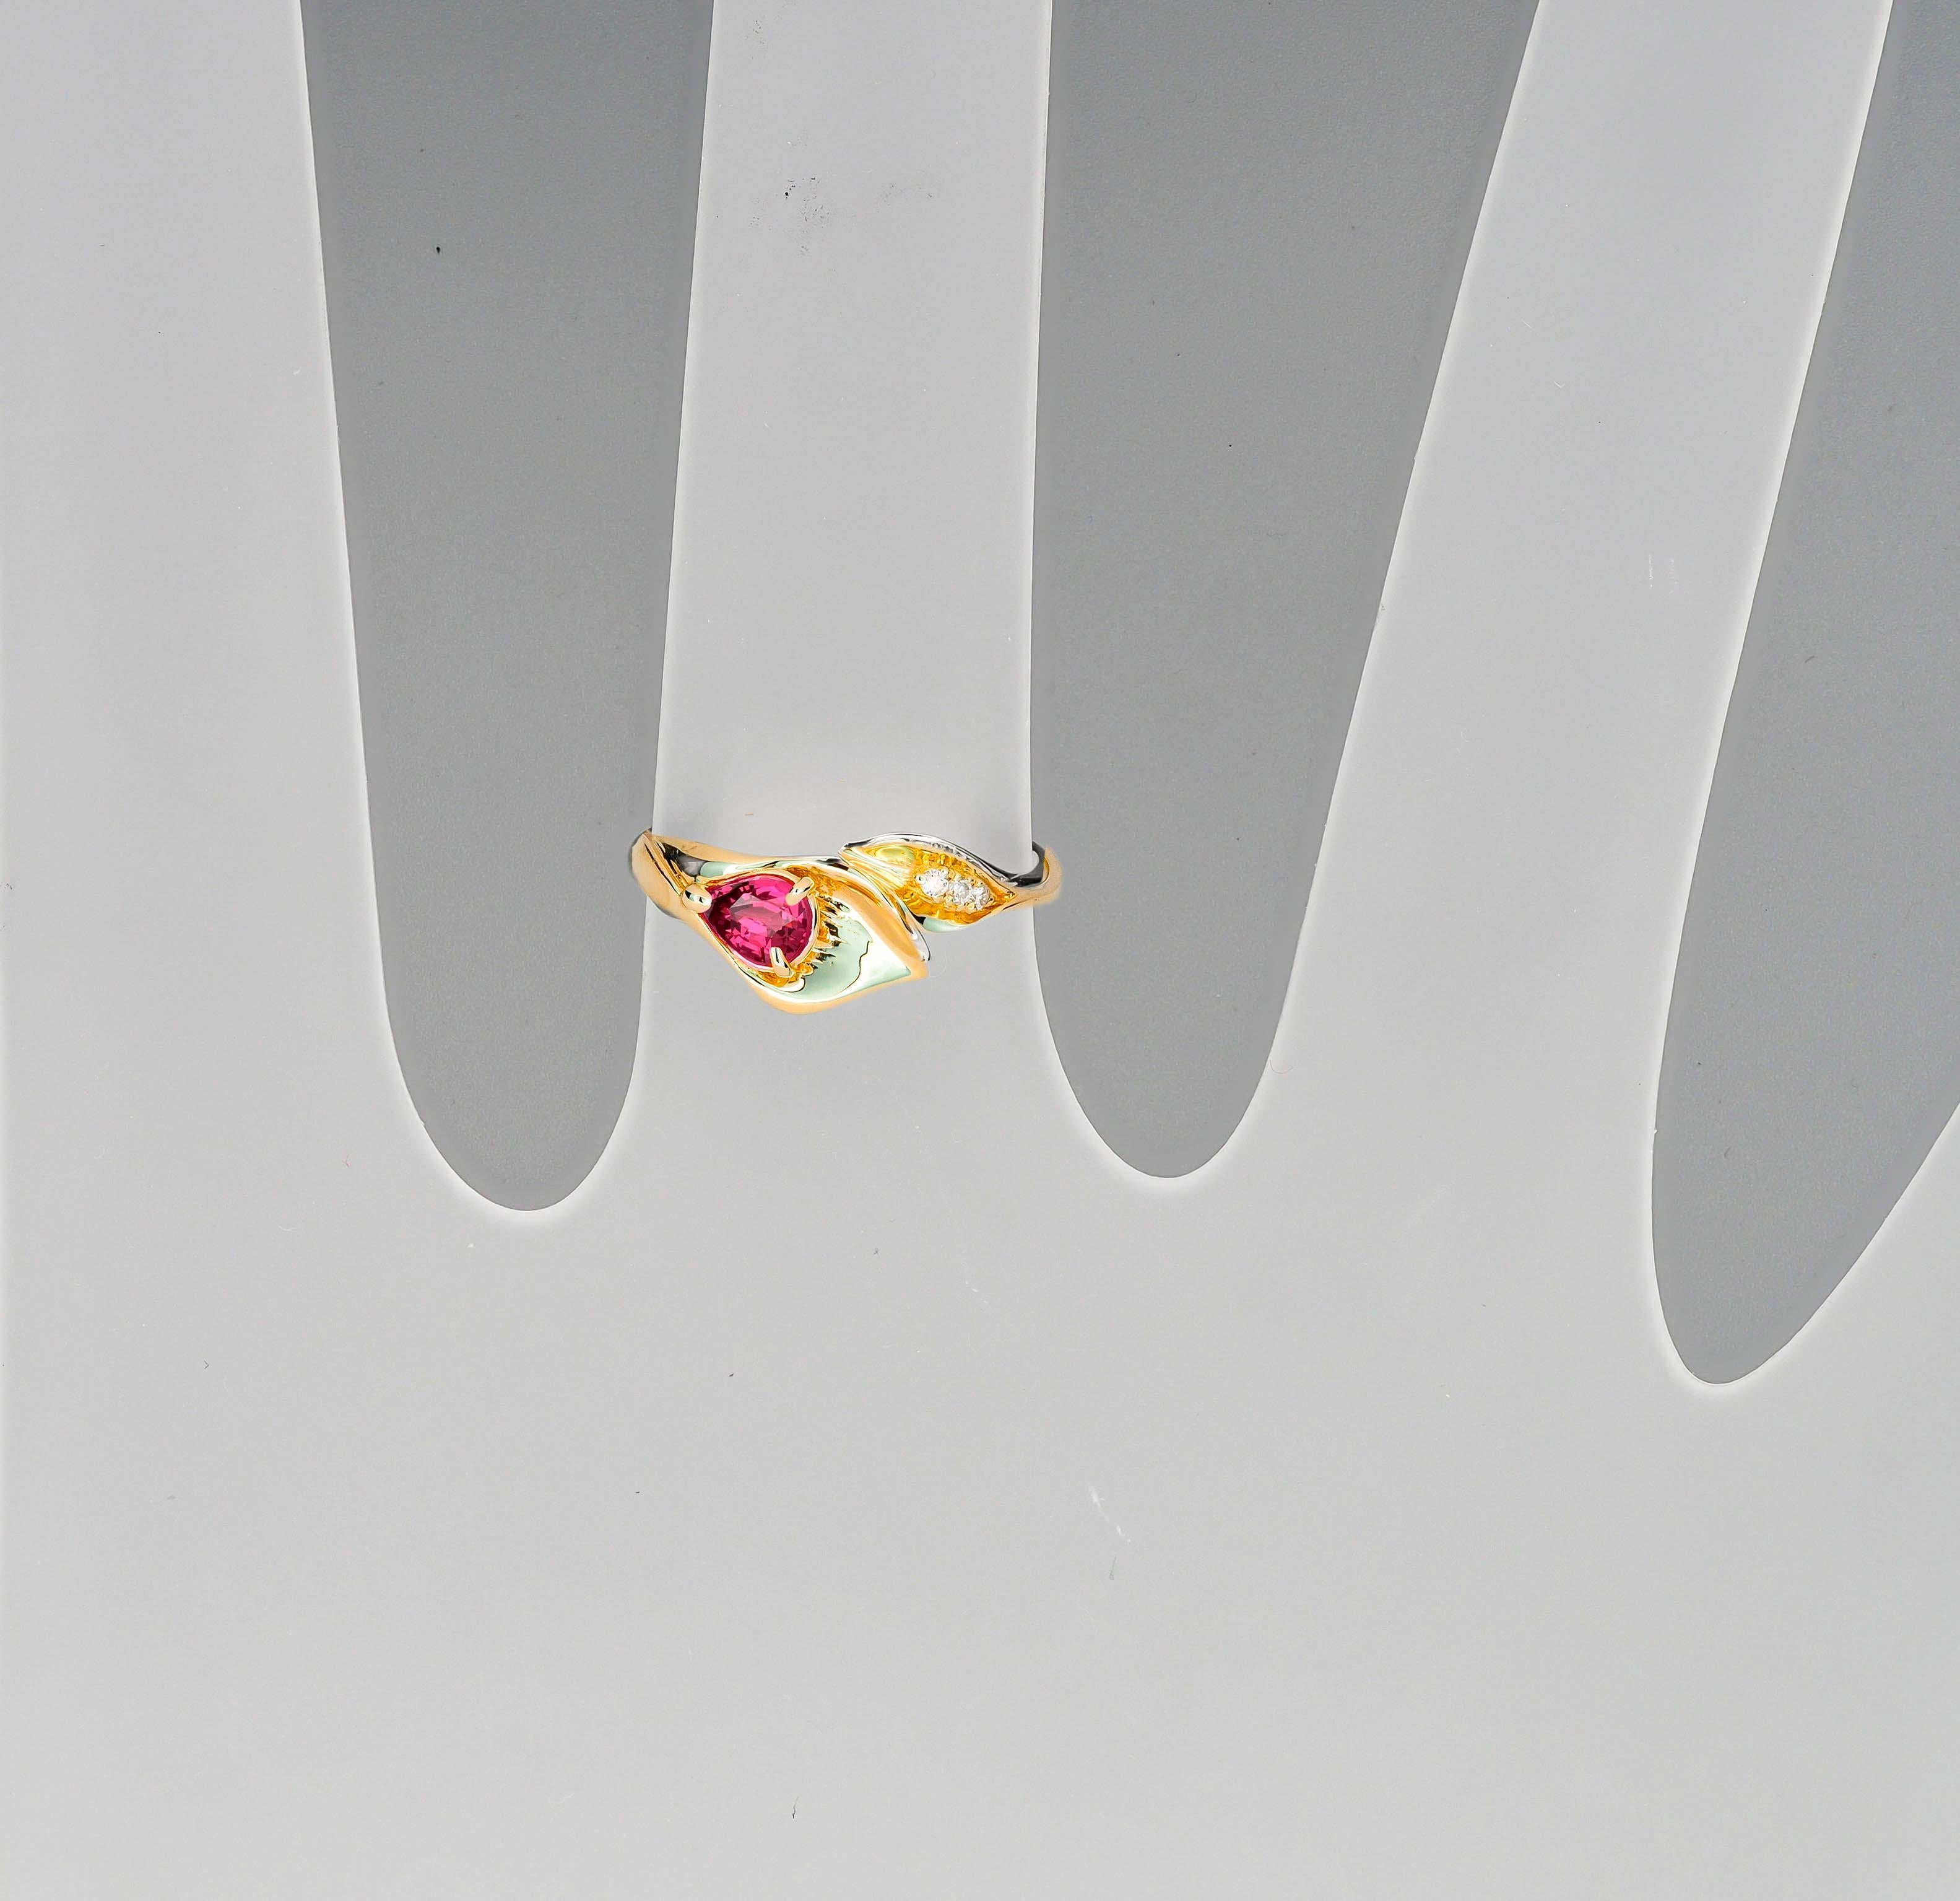 For Sale:  Lily Calla Gold Ring, 14 Karat Gold Ring with Garnet and Diamonds 6